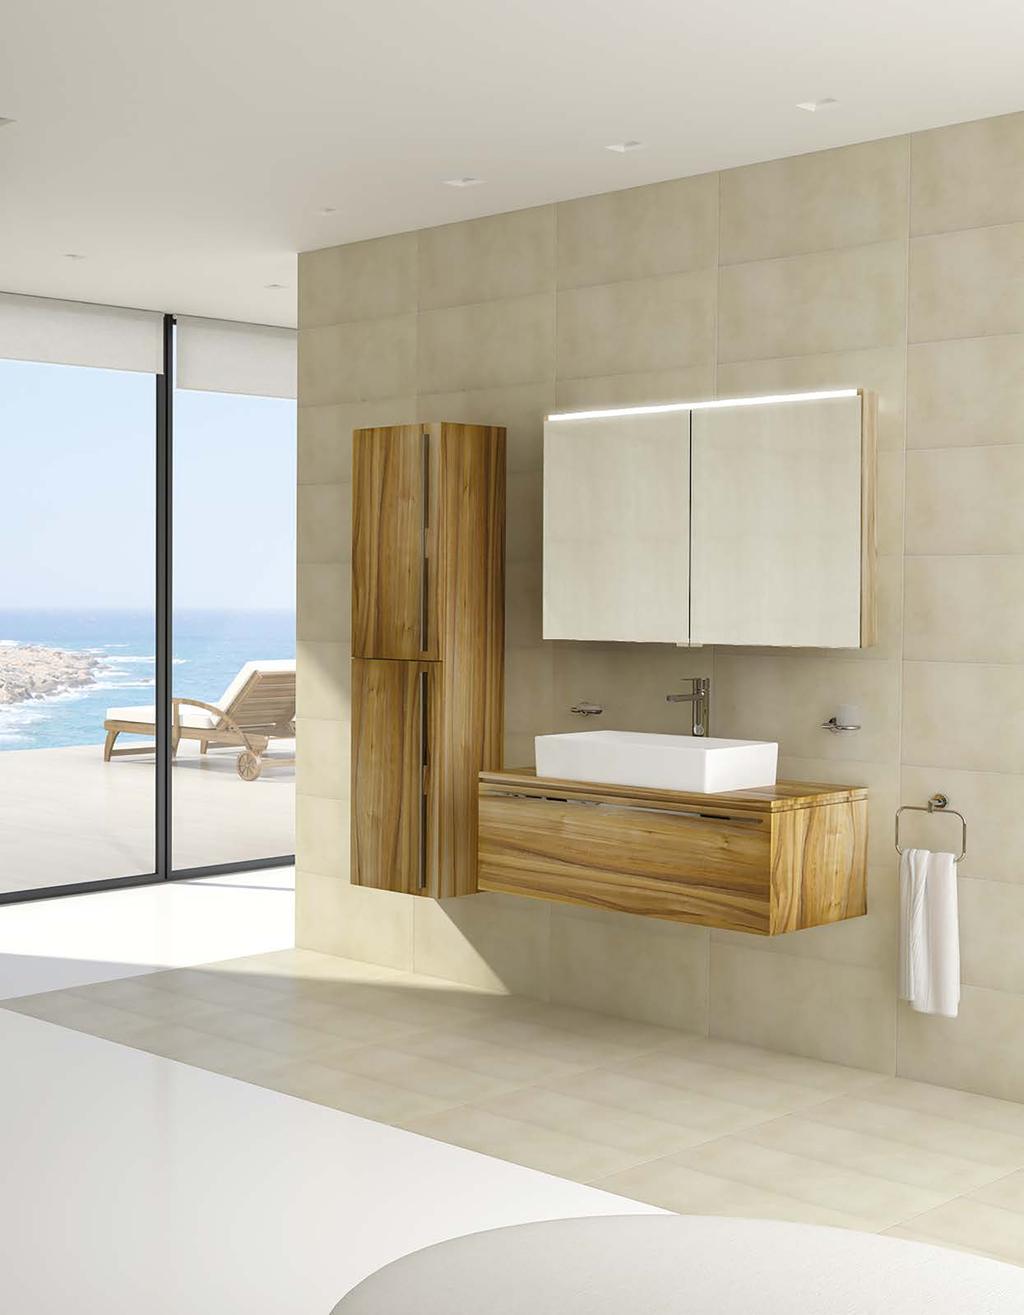 SYSTEM FIT NEXUS SYSTEM FIT An extensive range of beautifullydesigned cupboards, mirrors and washbasin units.